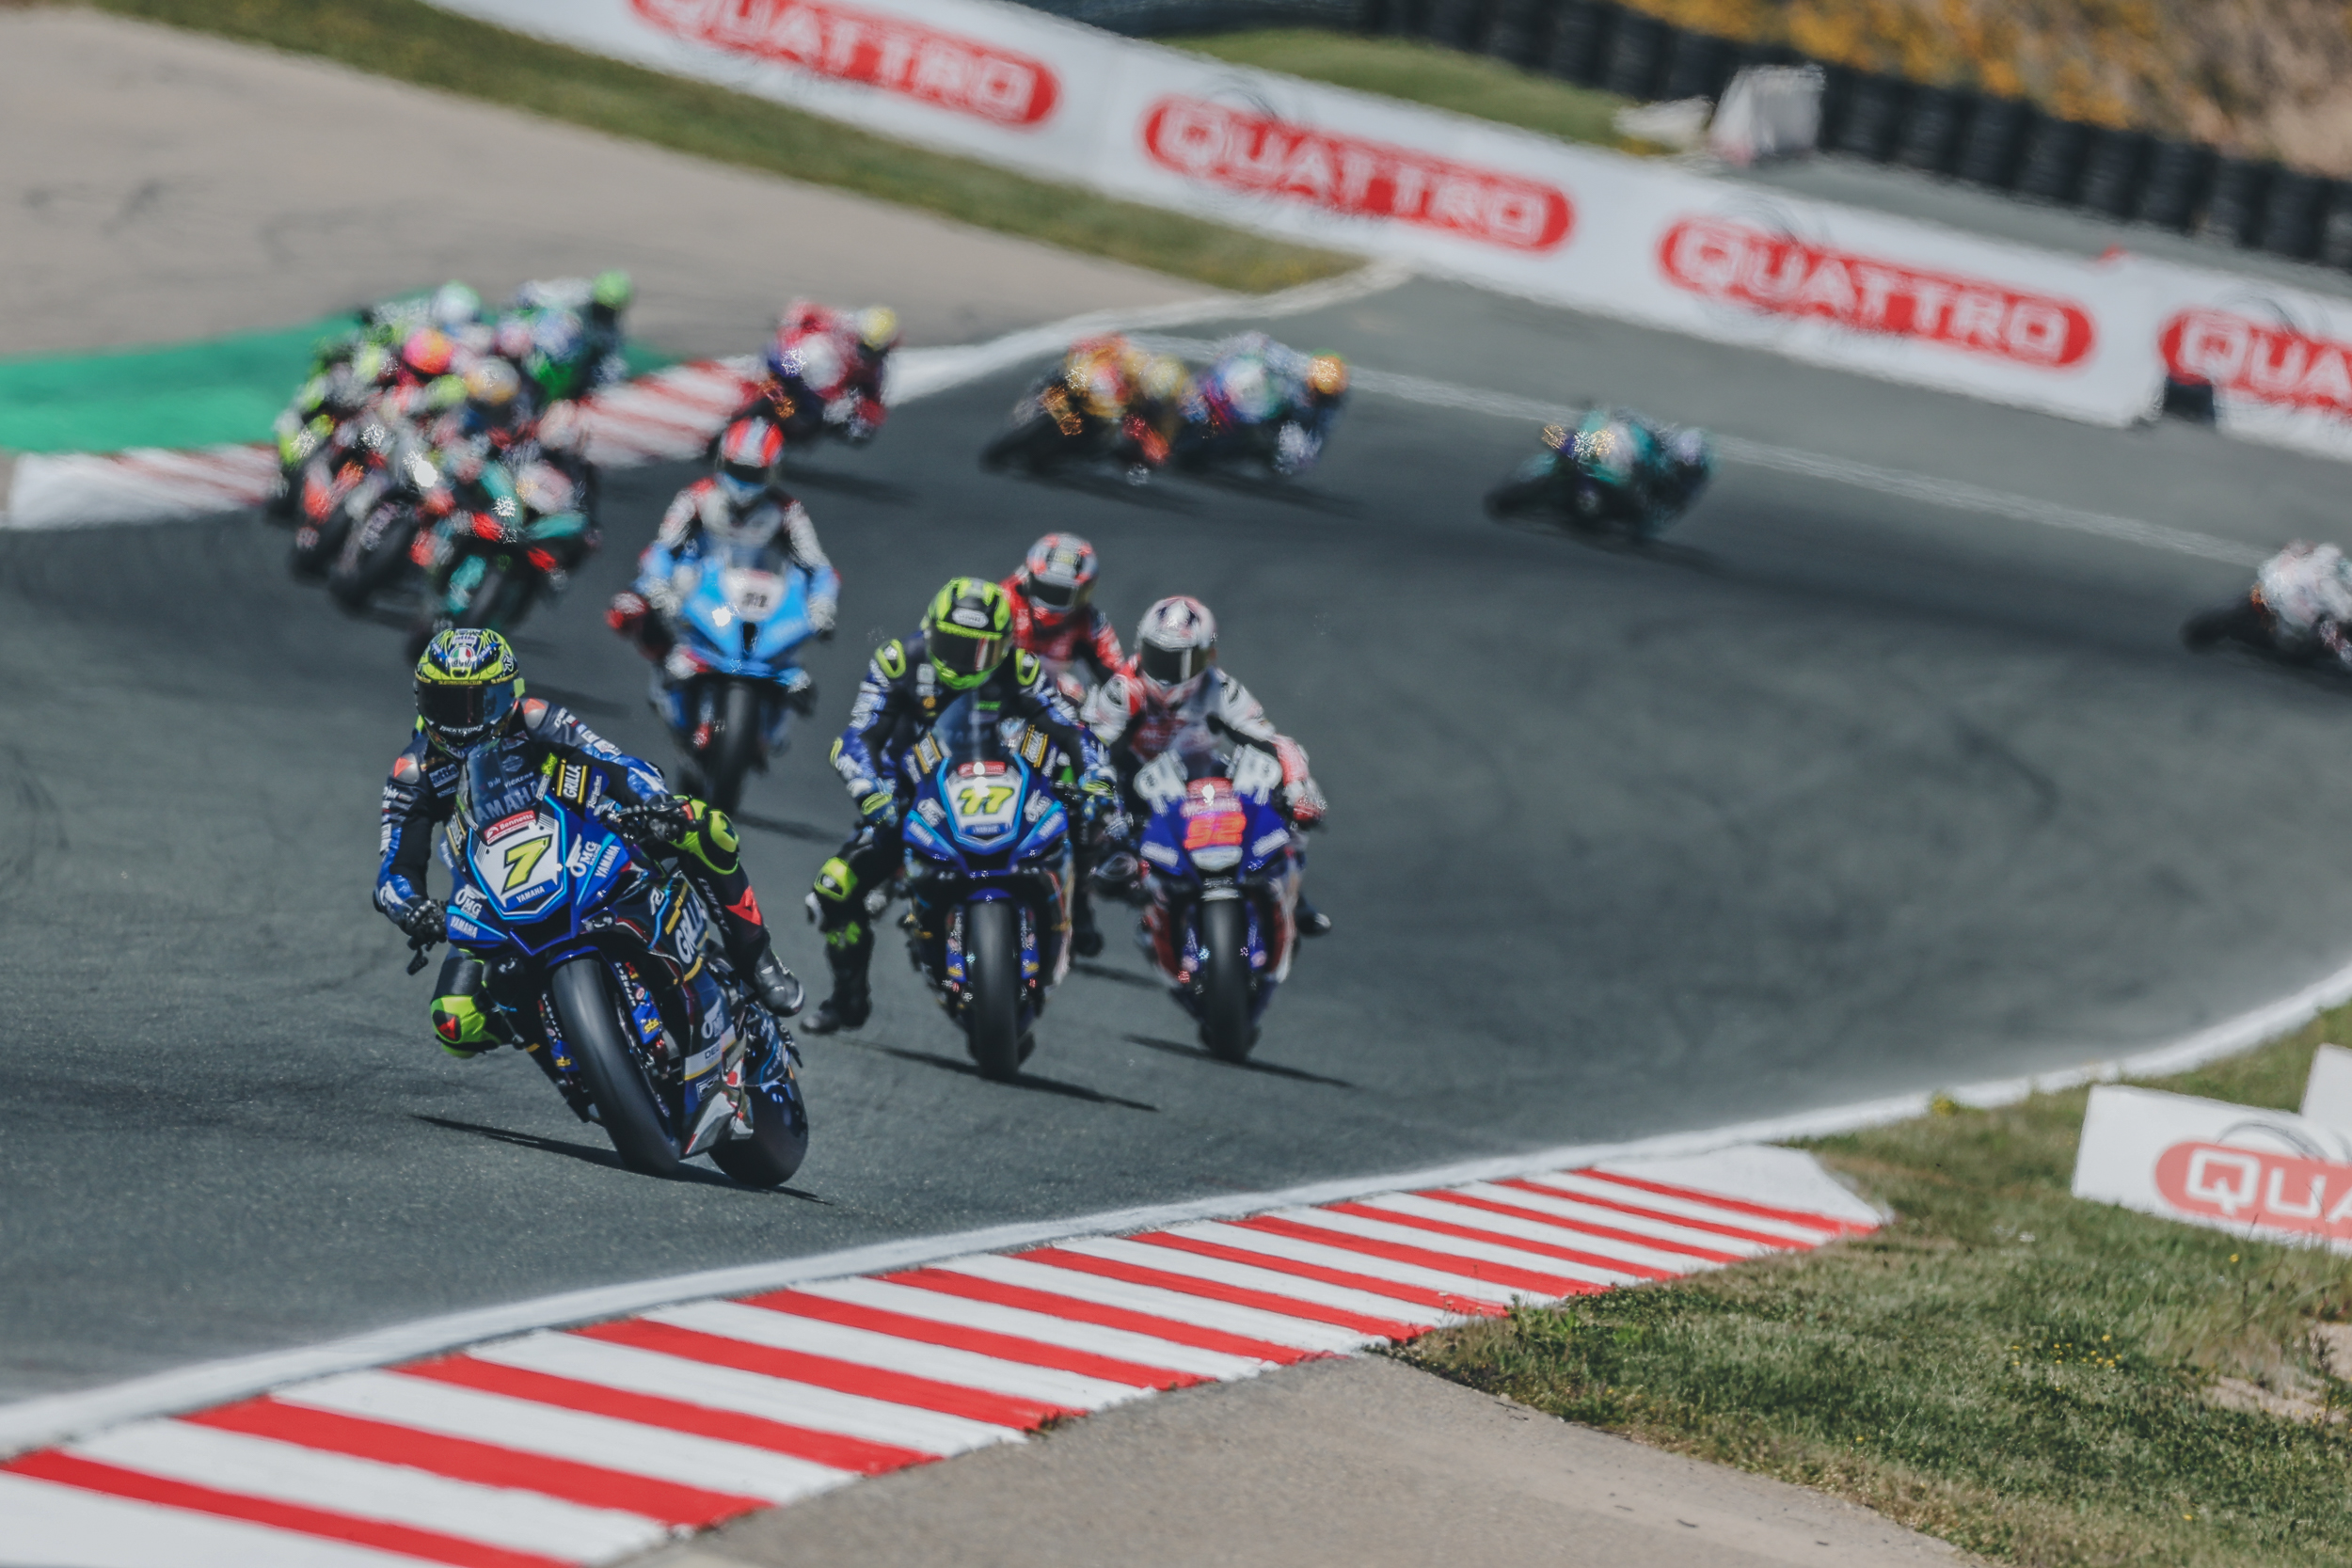 Ryan Vickers Secures Double Victory at Circuito de Navarra Inc. Support races round up!